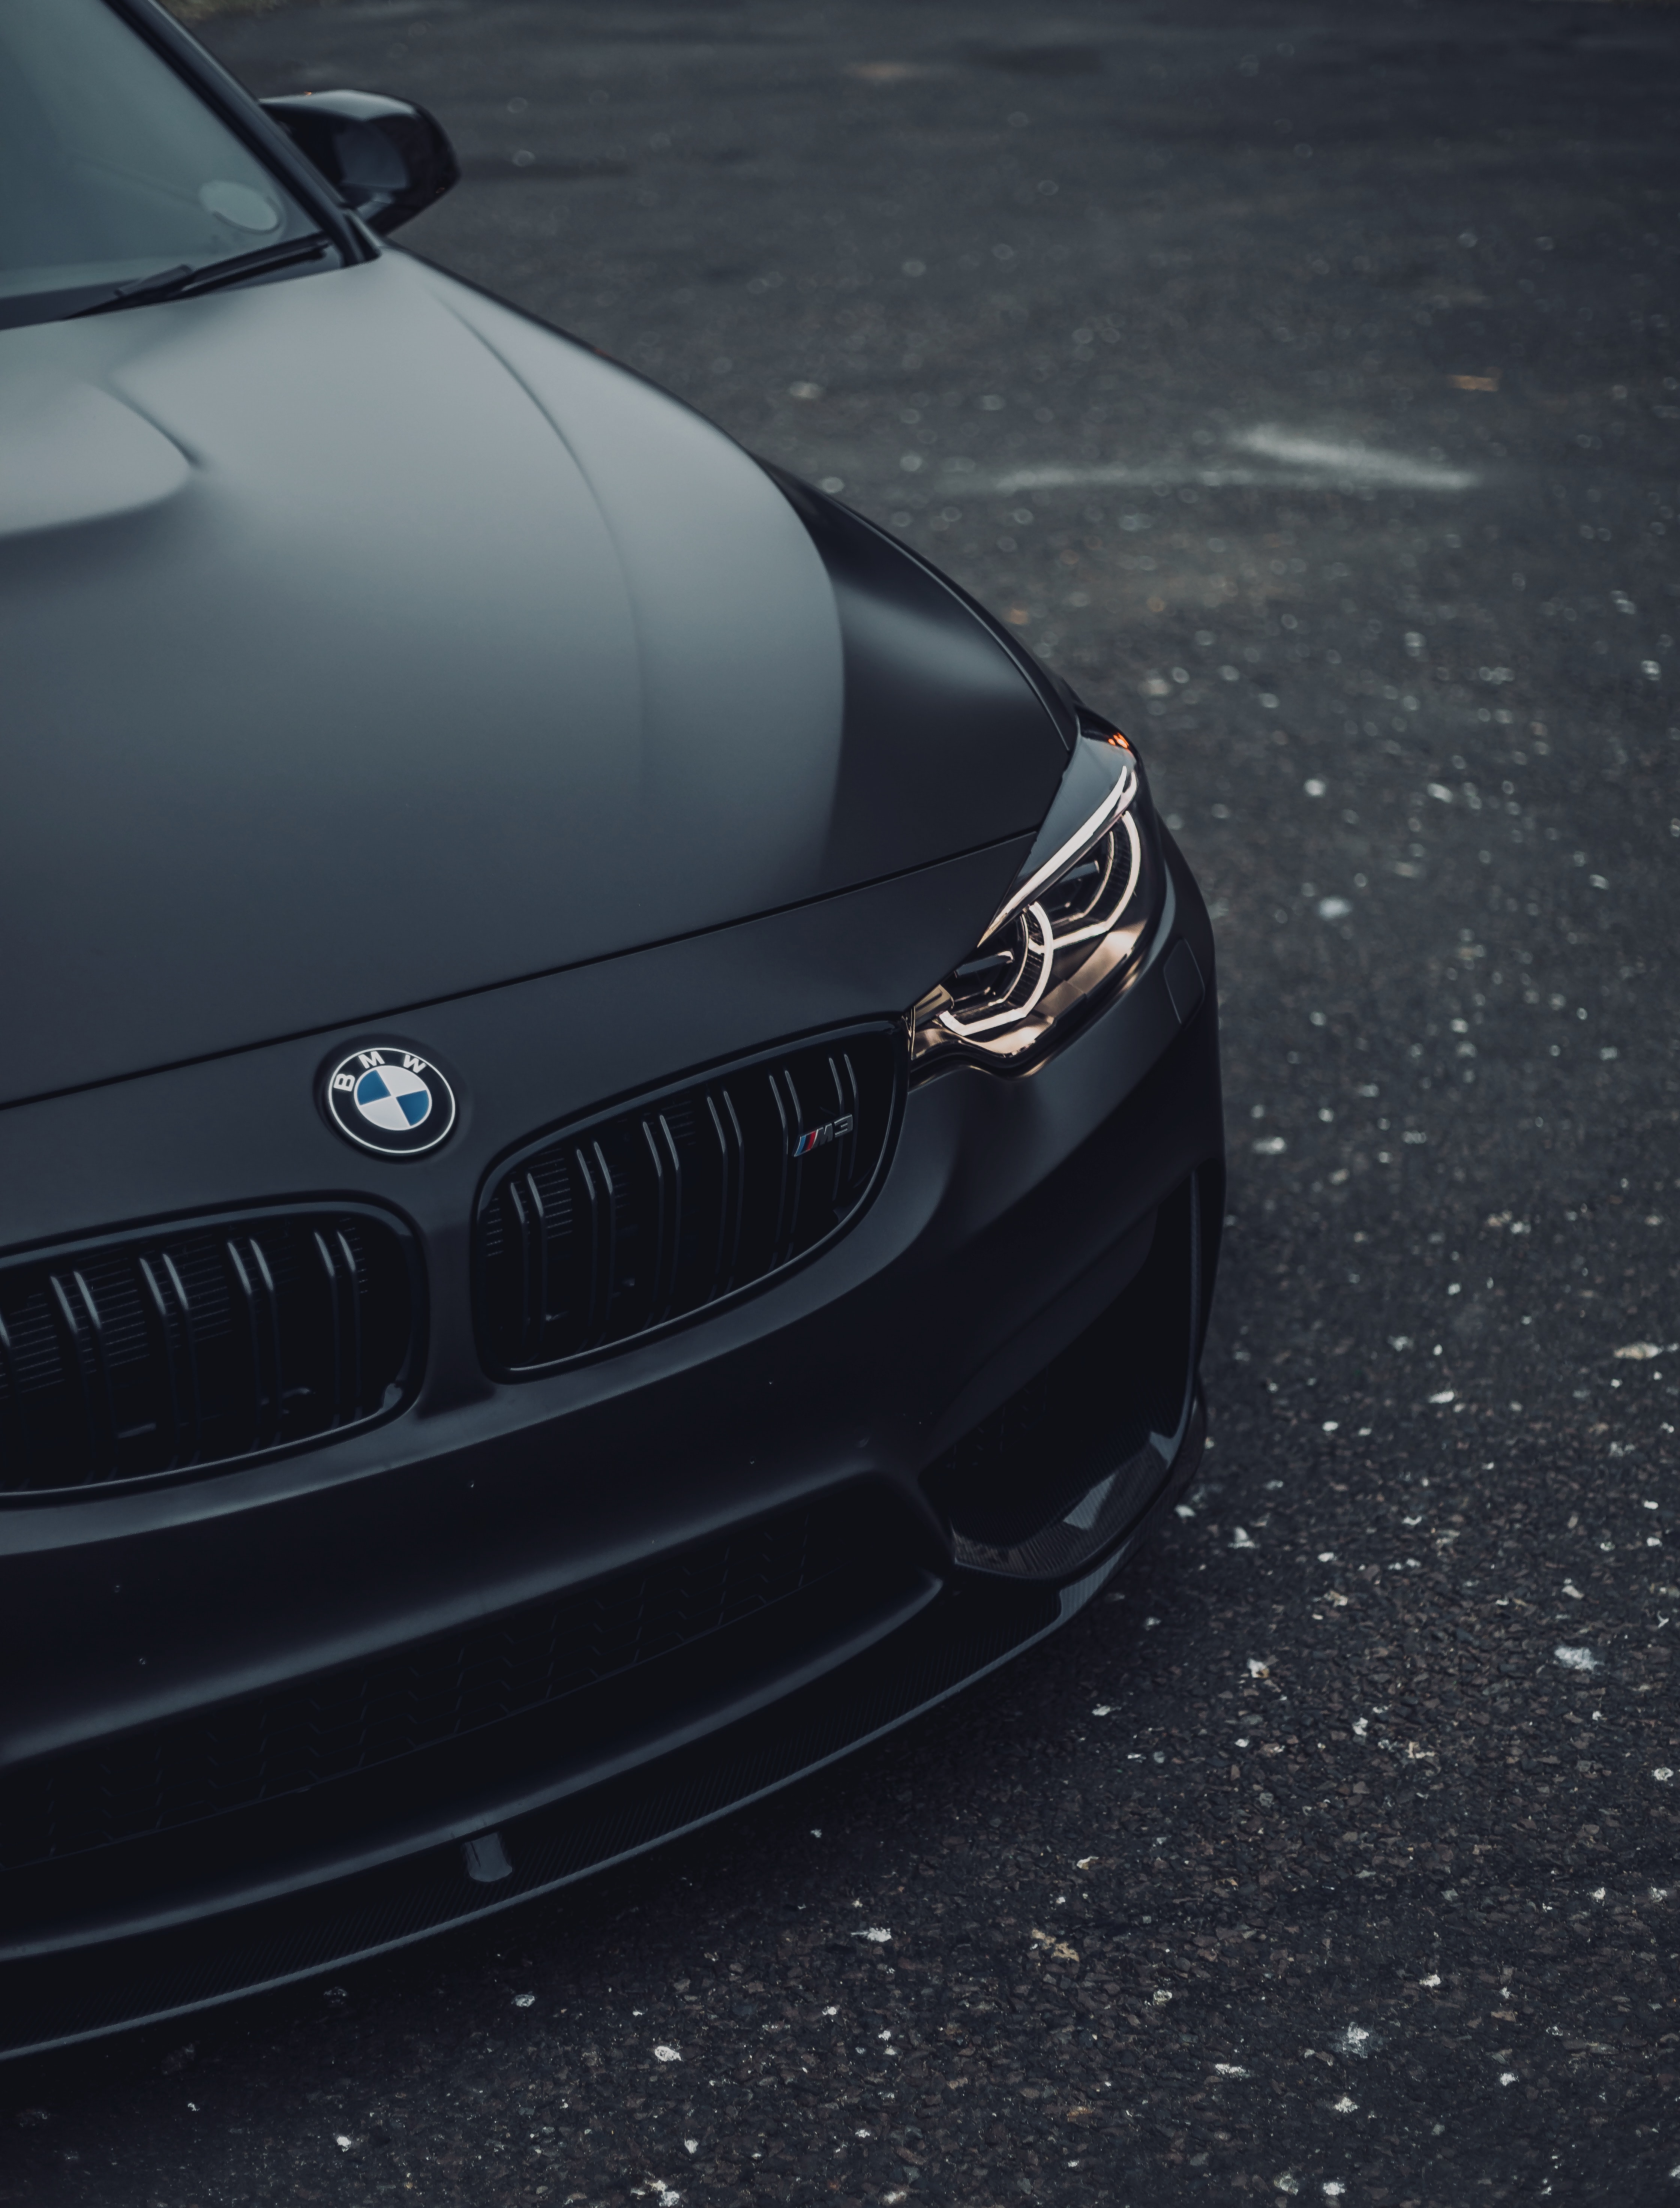 Bmw iPhone wallpapers